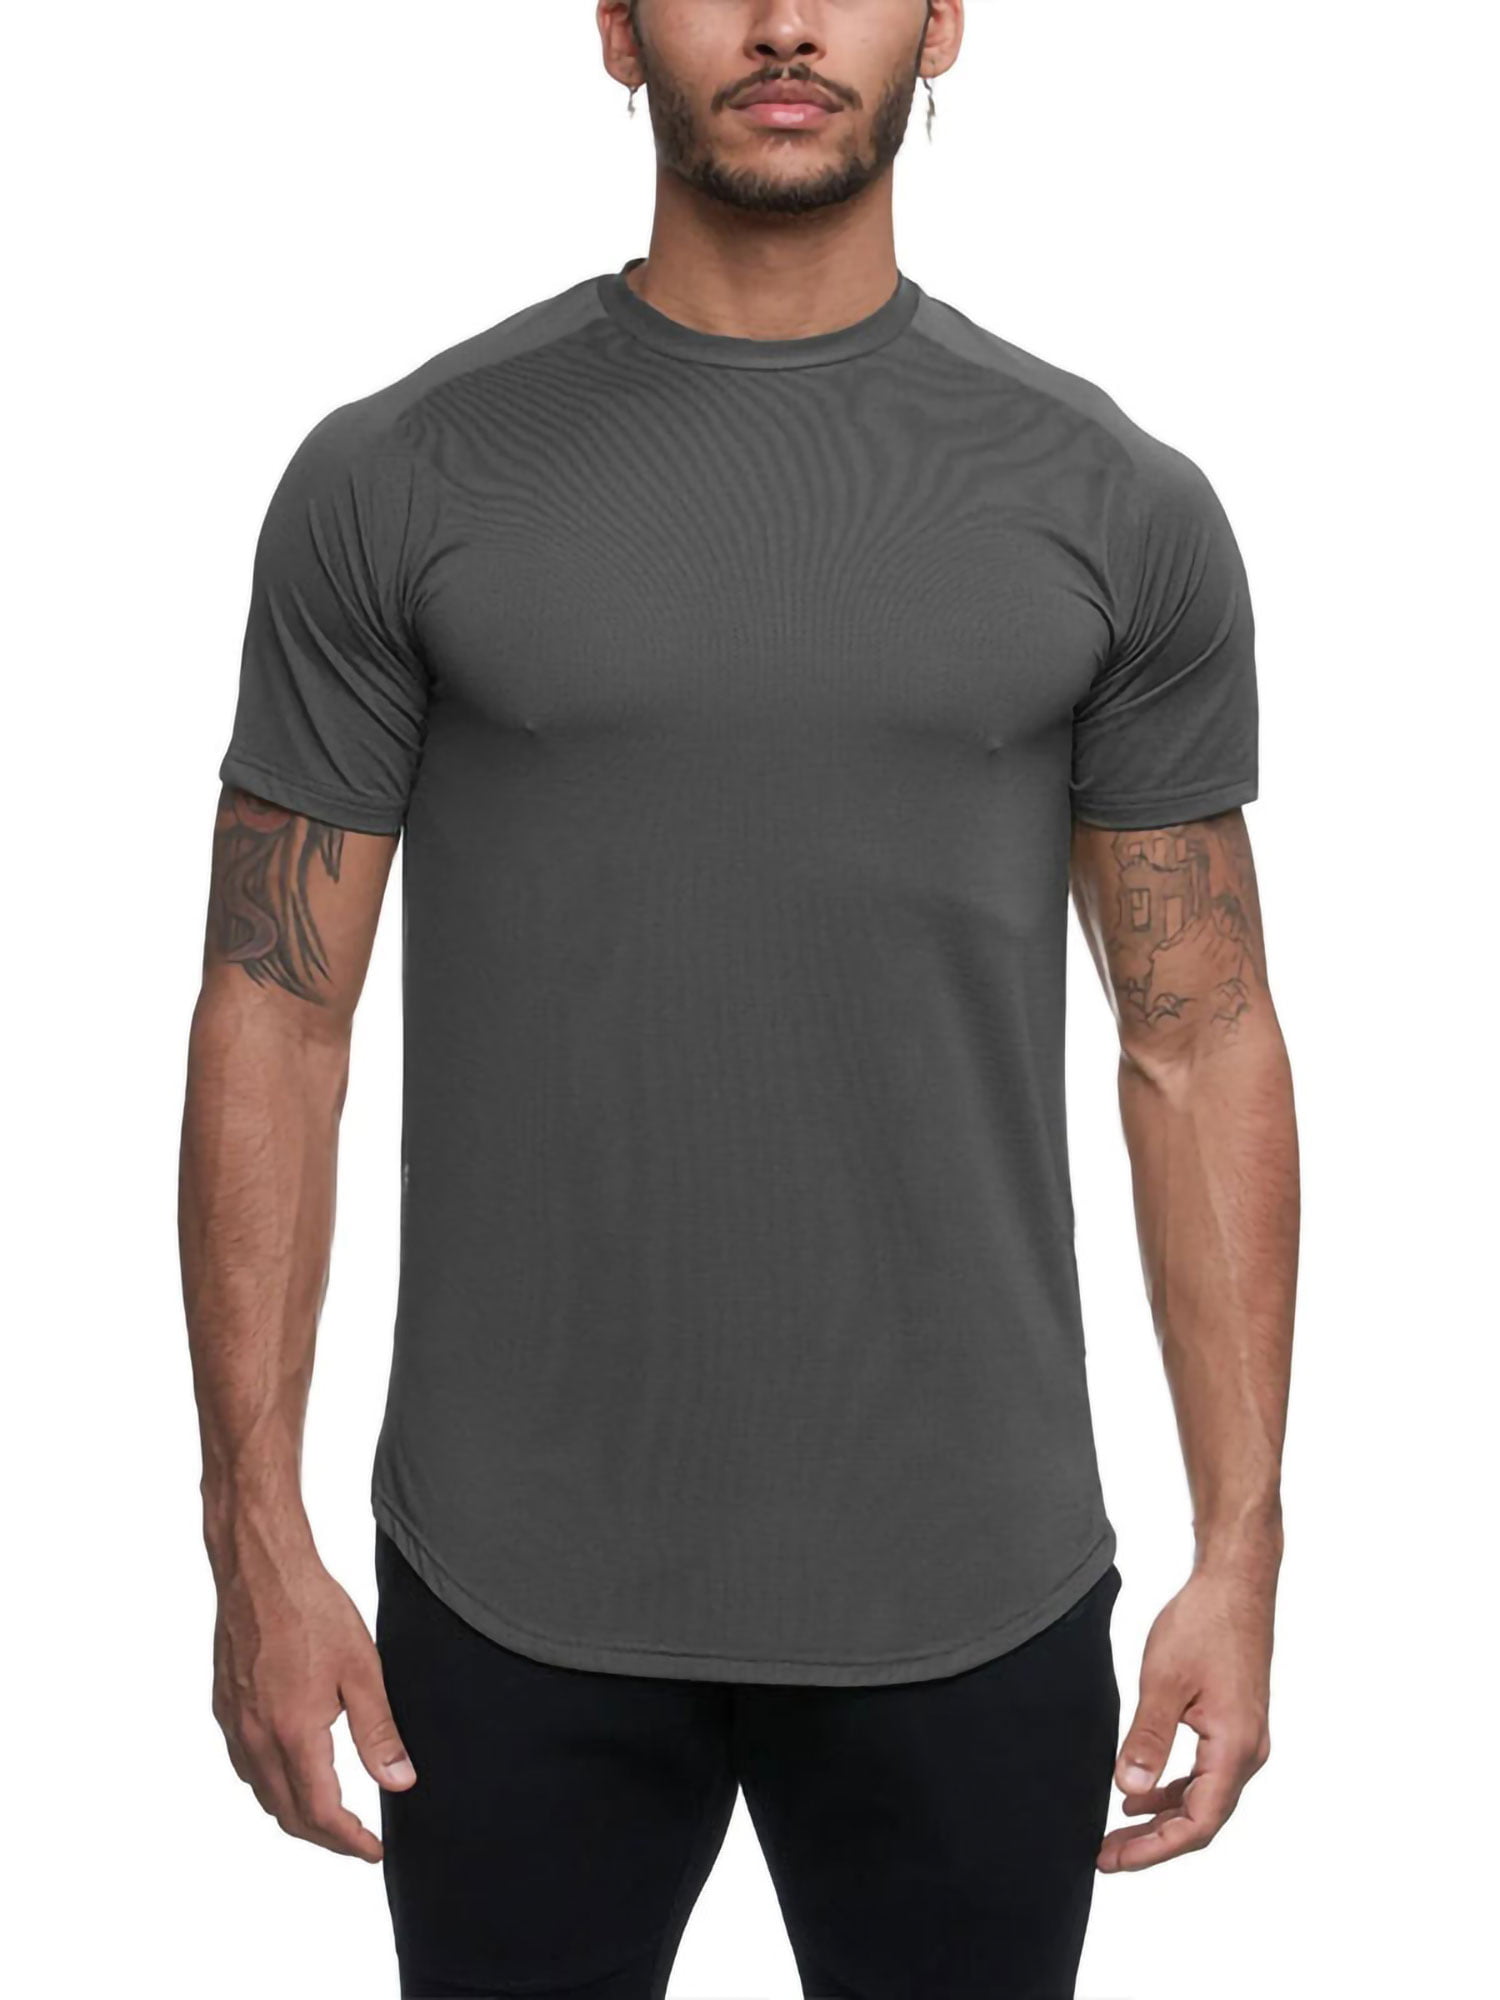 Mens Activewear Short Sleeve Base Layer Top Muscle Workout Gym Compression Shirt 